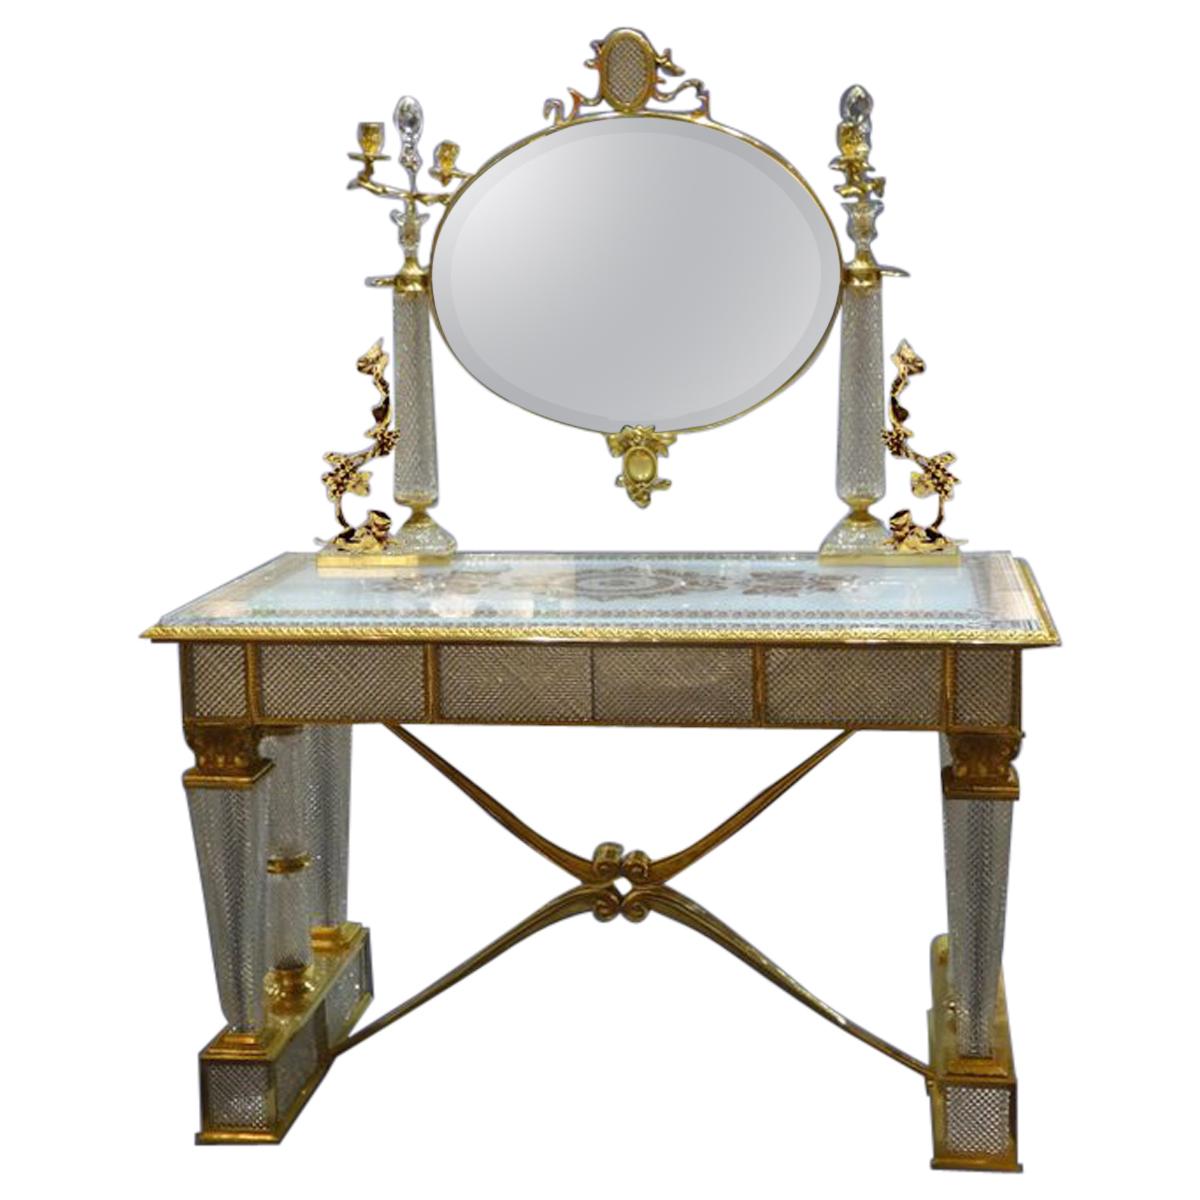 Contemporary Crystal Toilet Table, With Bronze Covered With 22-Carat Gold